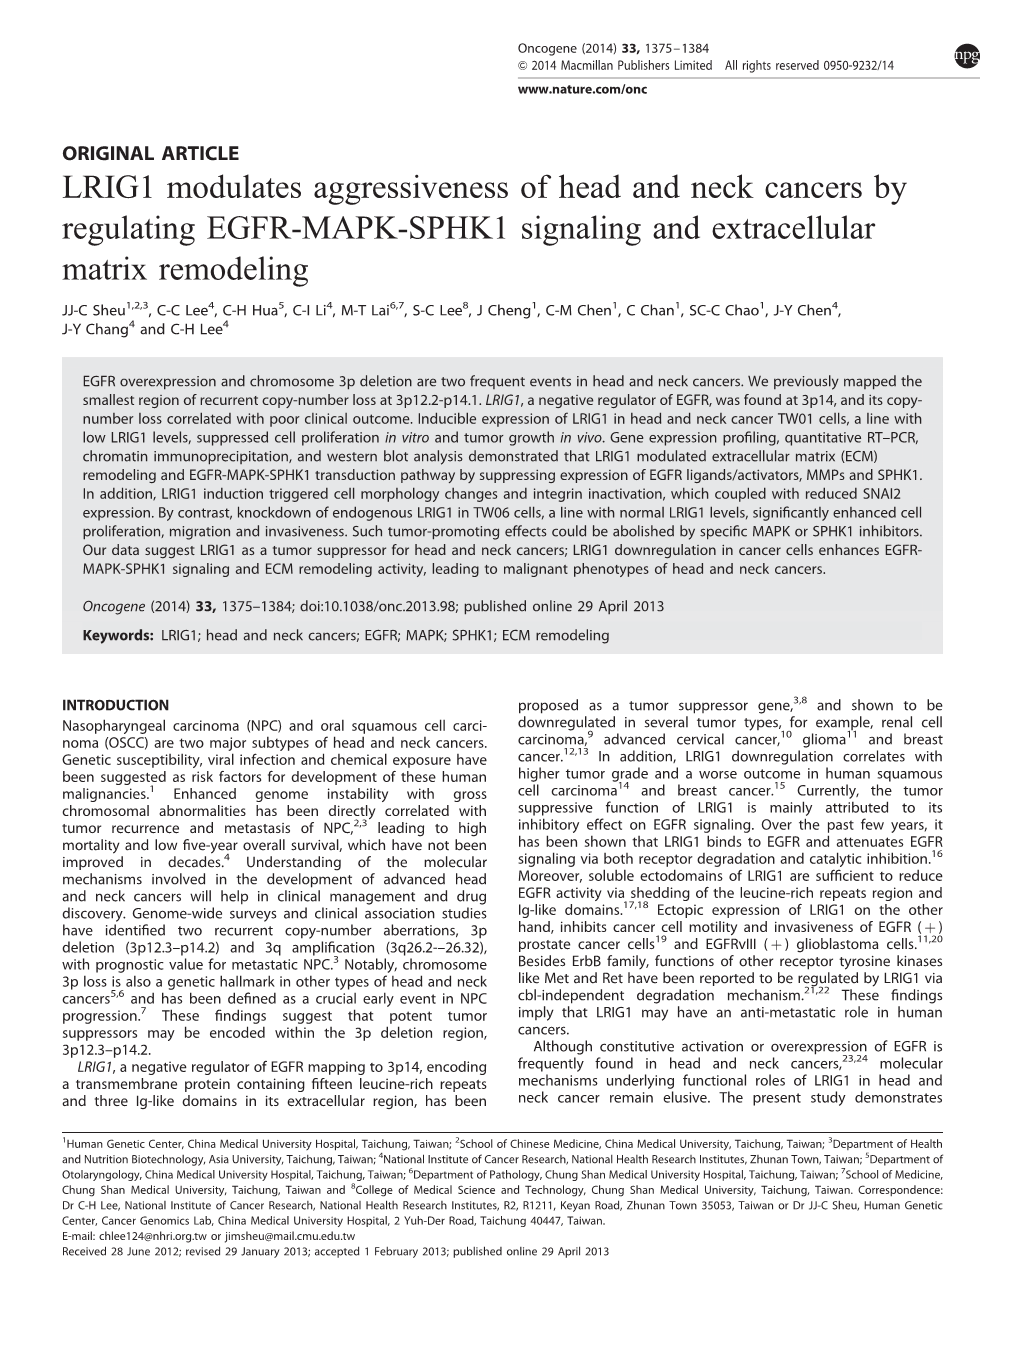 LRIG1 Modulates Aggressiveness of Head and Neck Cancers by Regulating EGFR-MAPK-SPHK1 Signaling and Extracellular Matrix Remodeling